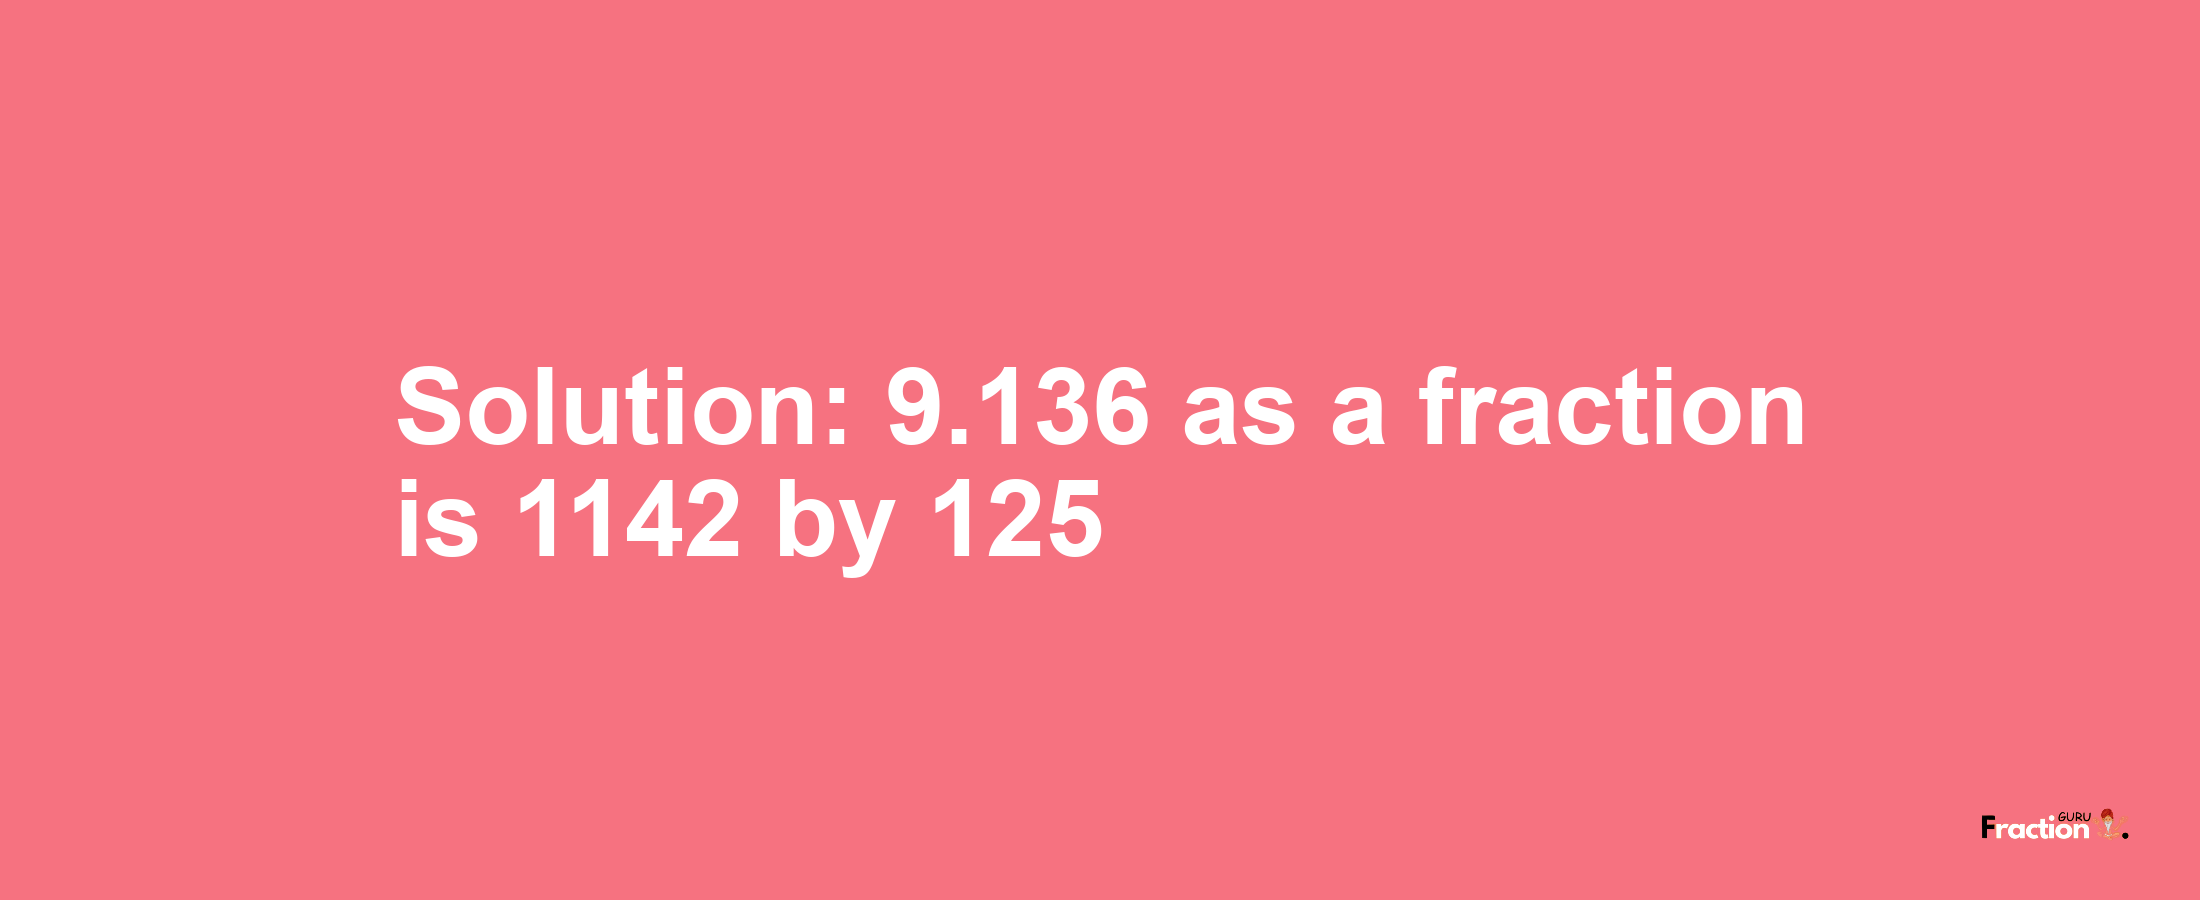 Solution:9.136 as a fraction is 1142/125